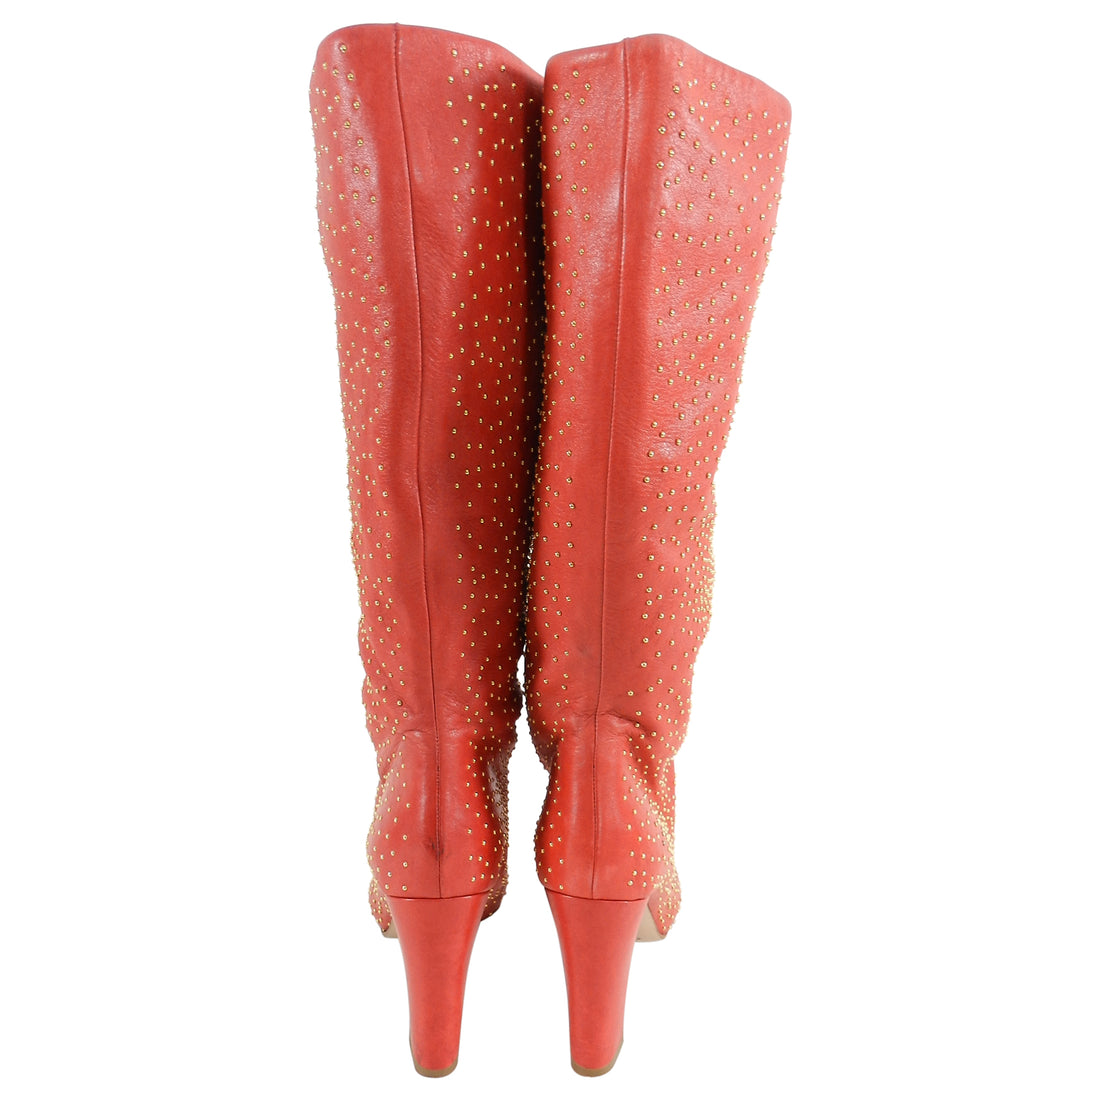 Chloe Tall Red Leather Boots with Gold Studs - 37